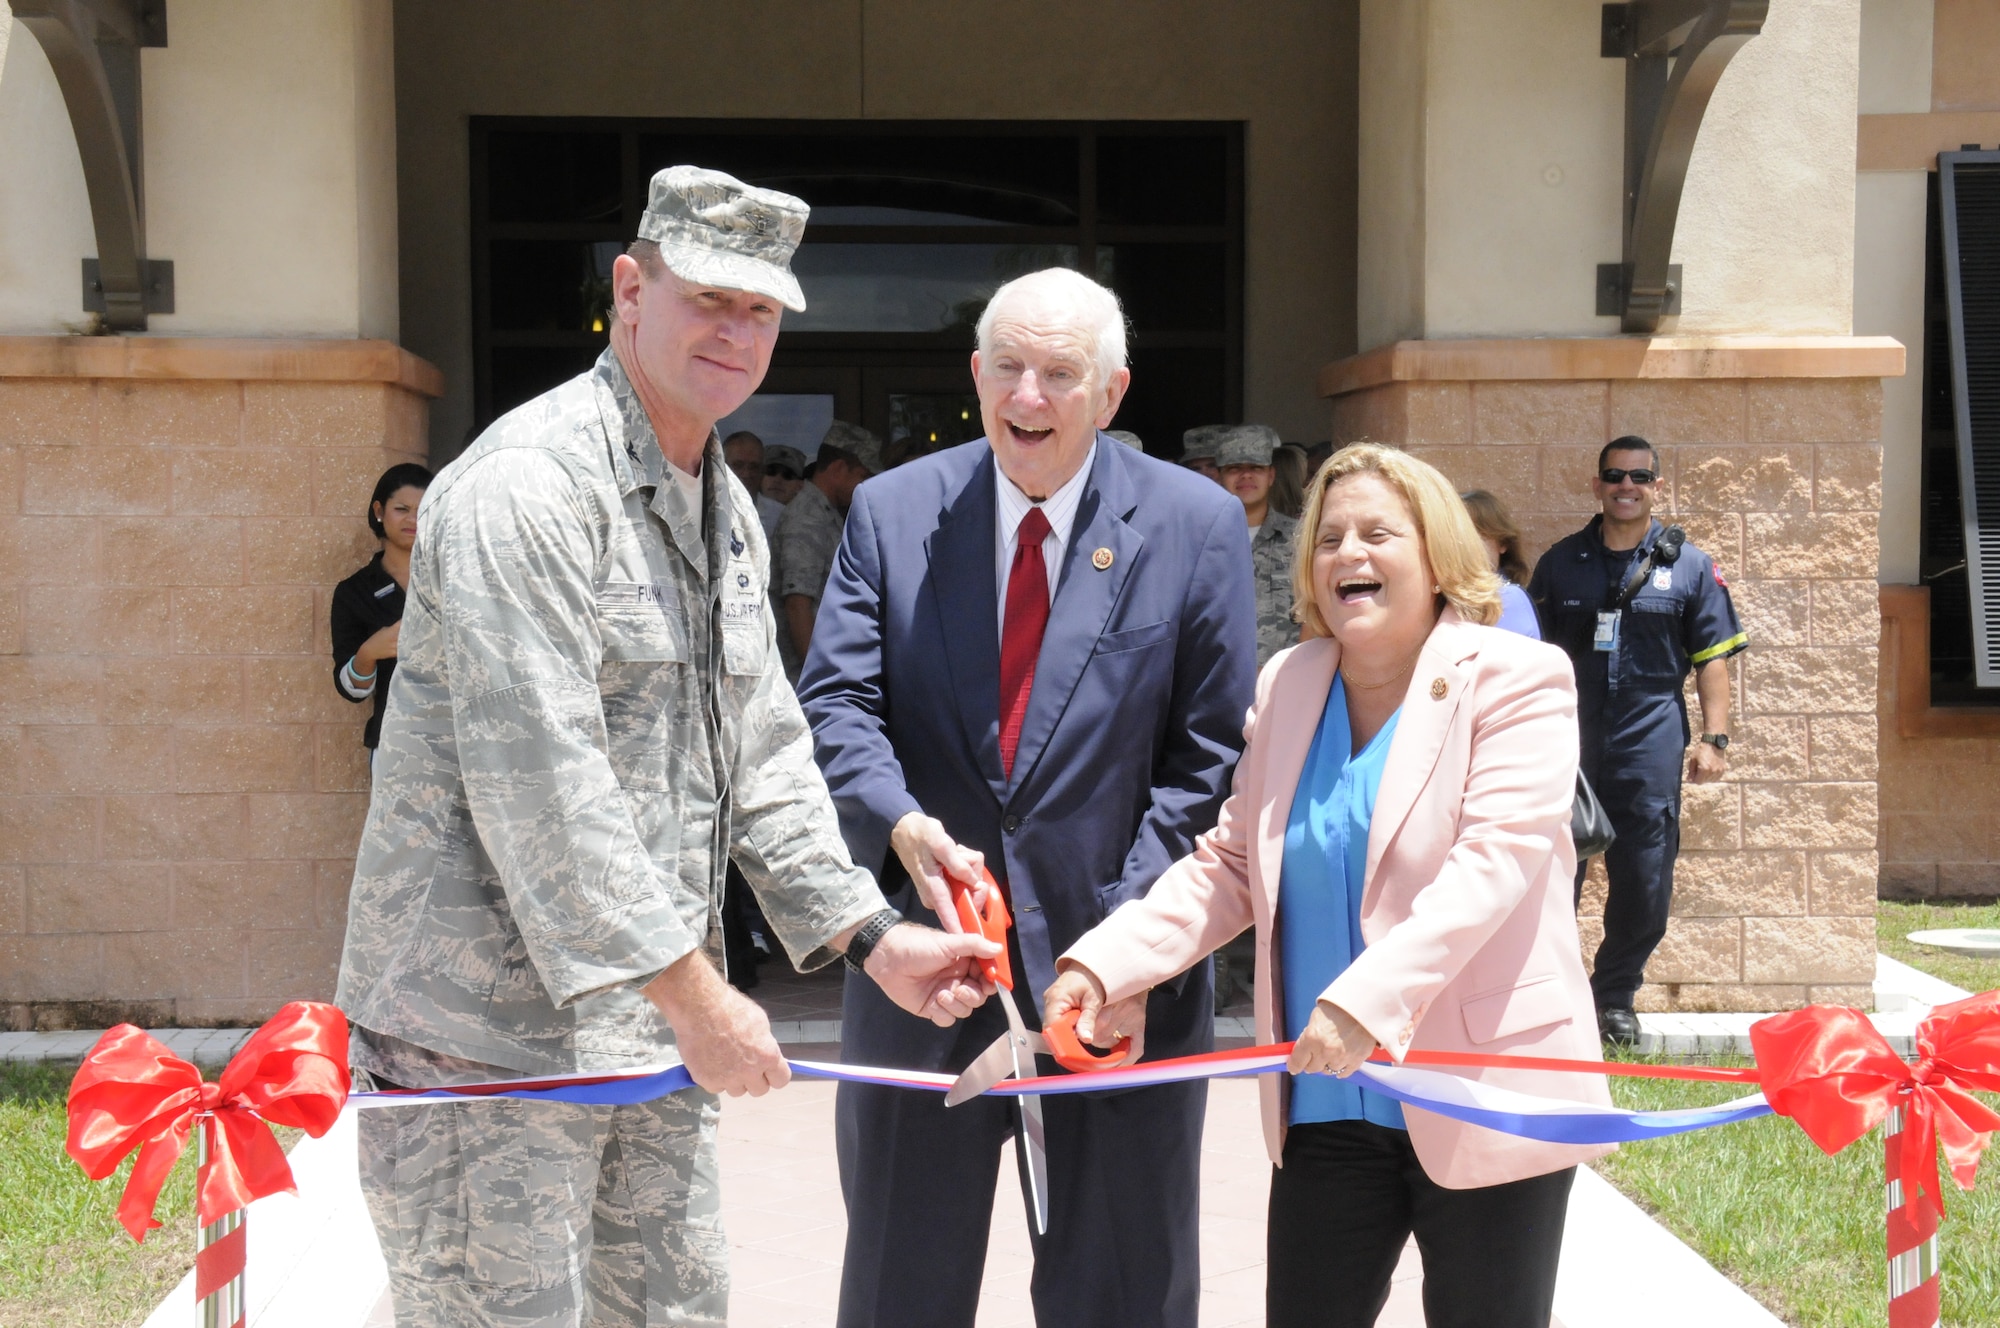 Congressman Sam Johnson, representing the 3rd District of Texas, Congresswoman Ileana Ros-Lehtinen, representing Florida’s 27th Congressional District, and Col. Chris Funk, 482nd Fighter Wing commander, cut the ribbon on the new Community Activity Center. Two brand-new facilities and the newly renovated Sam Johnson Fitness Center were officially opened during a ribbon cutting event Aug. 20 at Homestead Air Reserve Base. (Air Force photo/Senior Airman Nicolas Caceres)